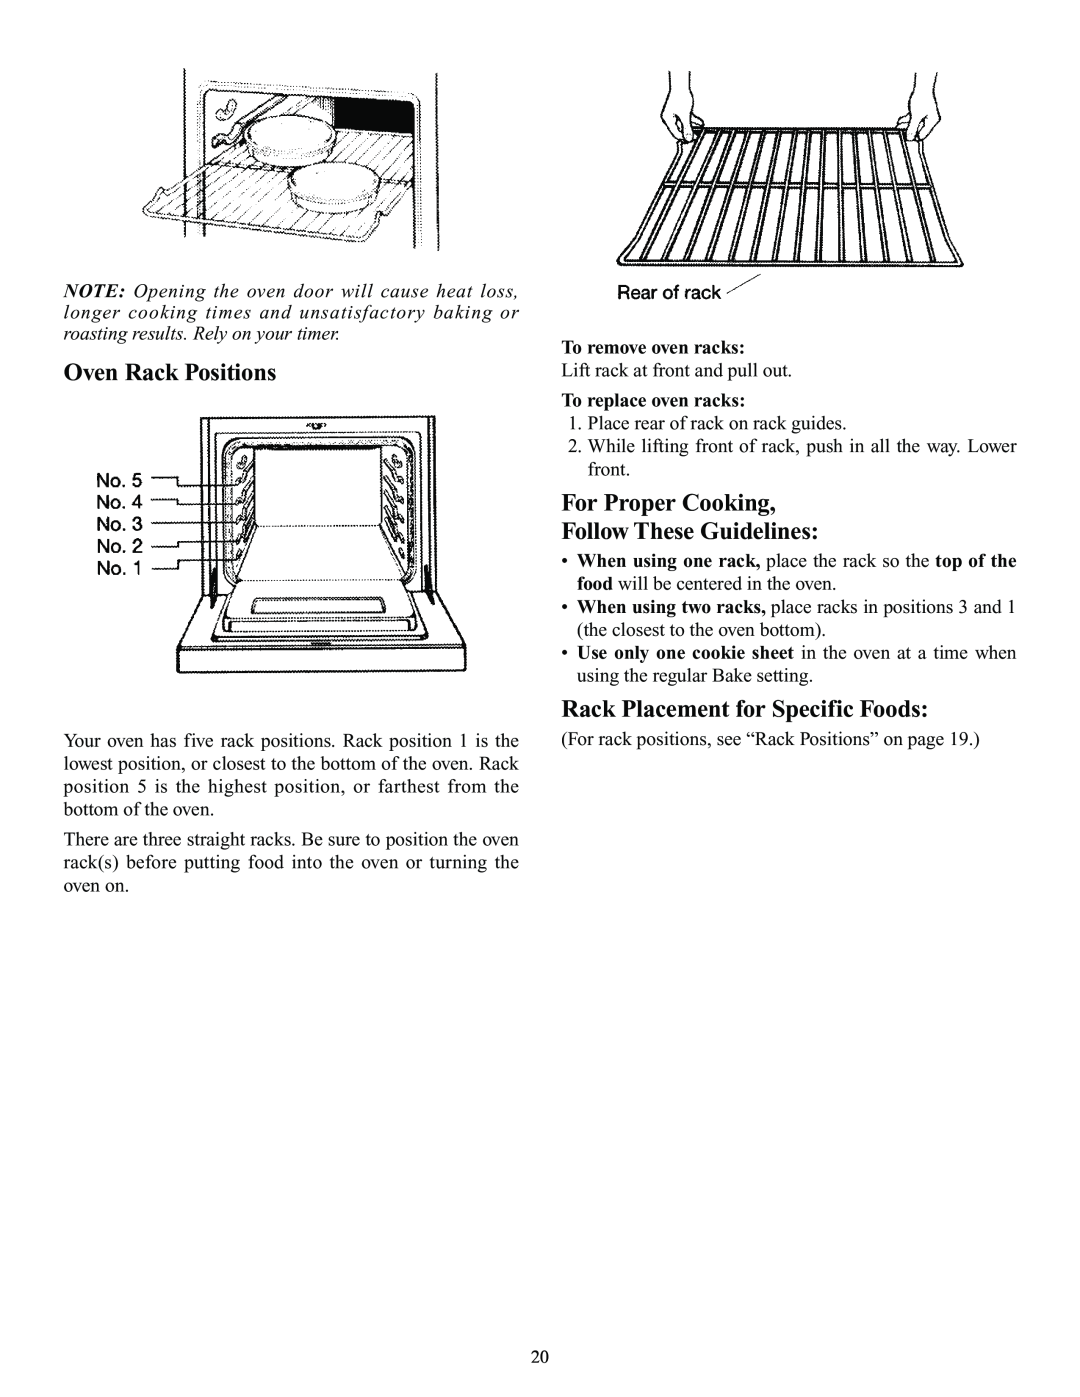 Elmira Stove Works 1954 Oven Rack Positions, For Proper Cooking Follow These Guidelines, Rack Placement for Specific Foods 